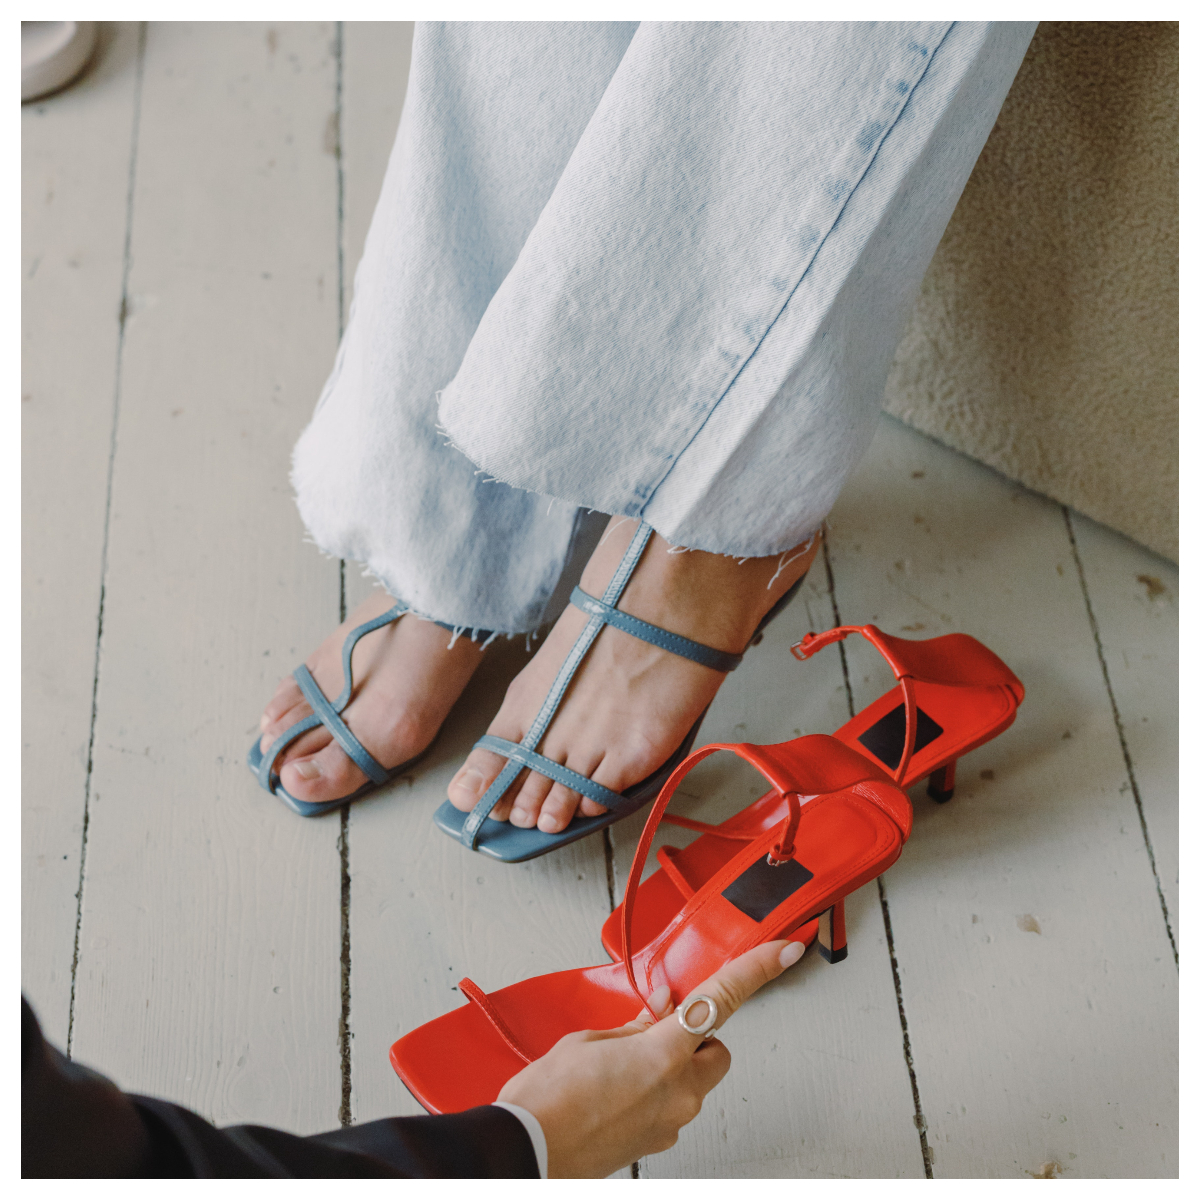 7 Amazing Women’s Sandals For You From the Amazon Deal of the Day